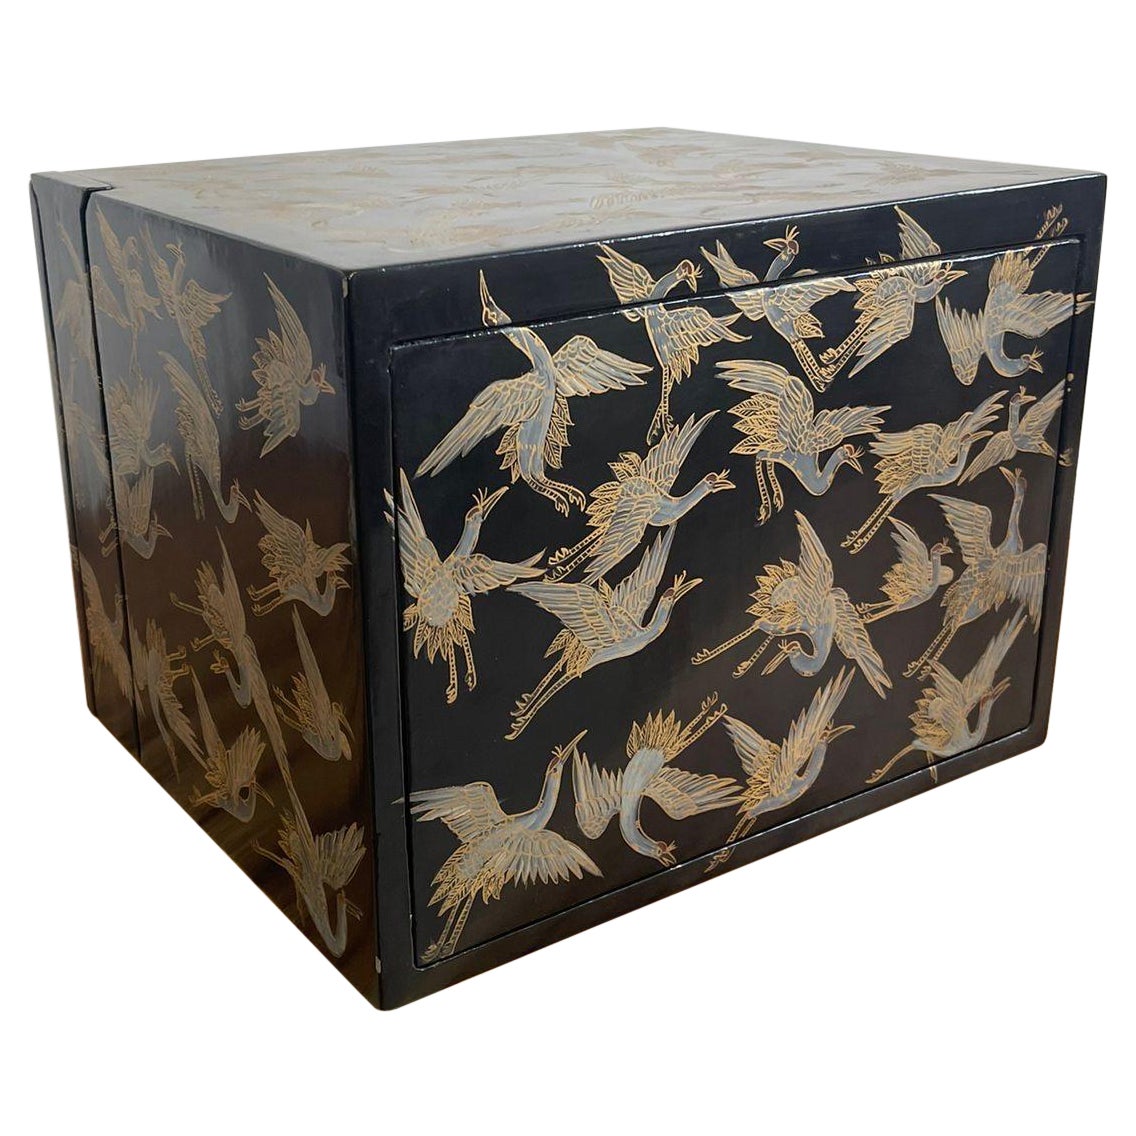 Japanese Storage Box With Hidden Compartments and Crane Motif.